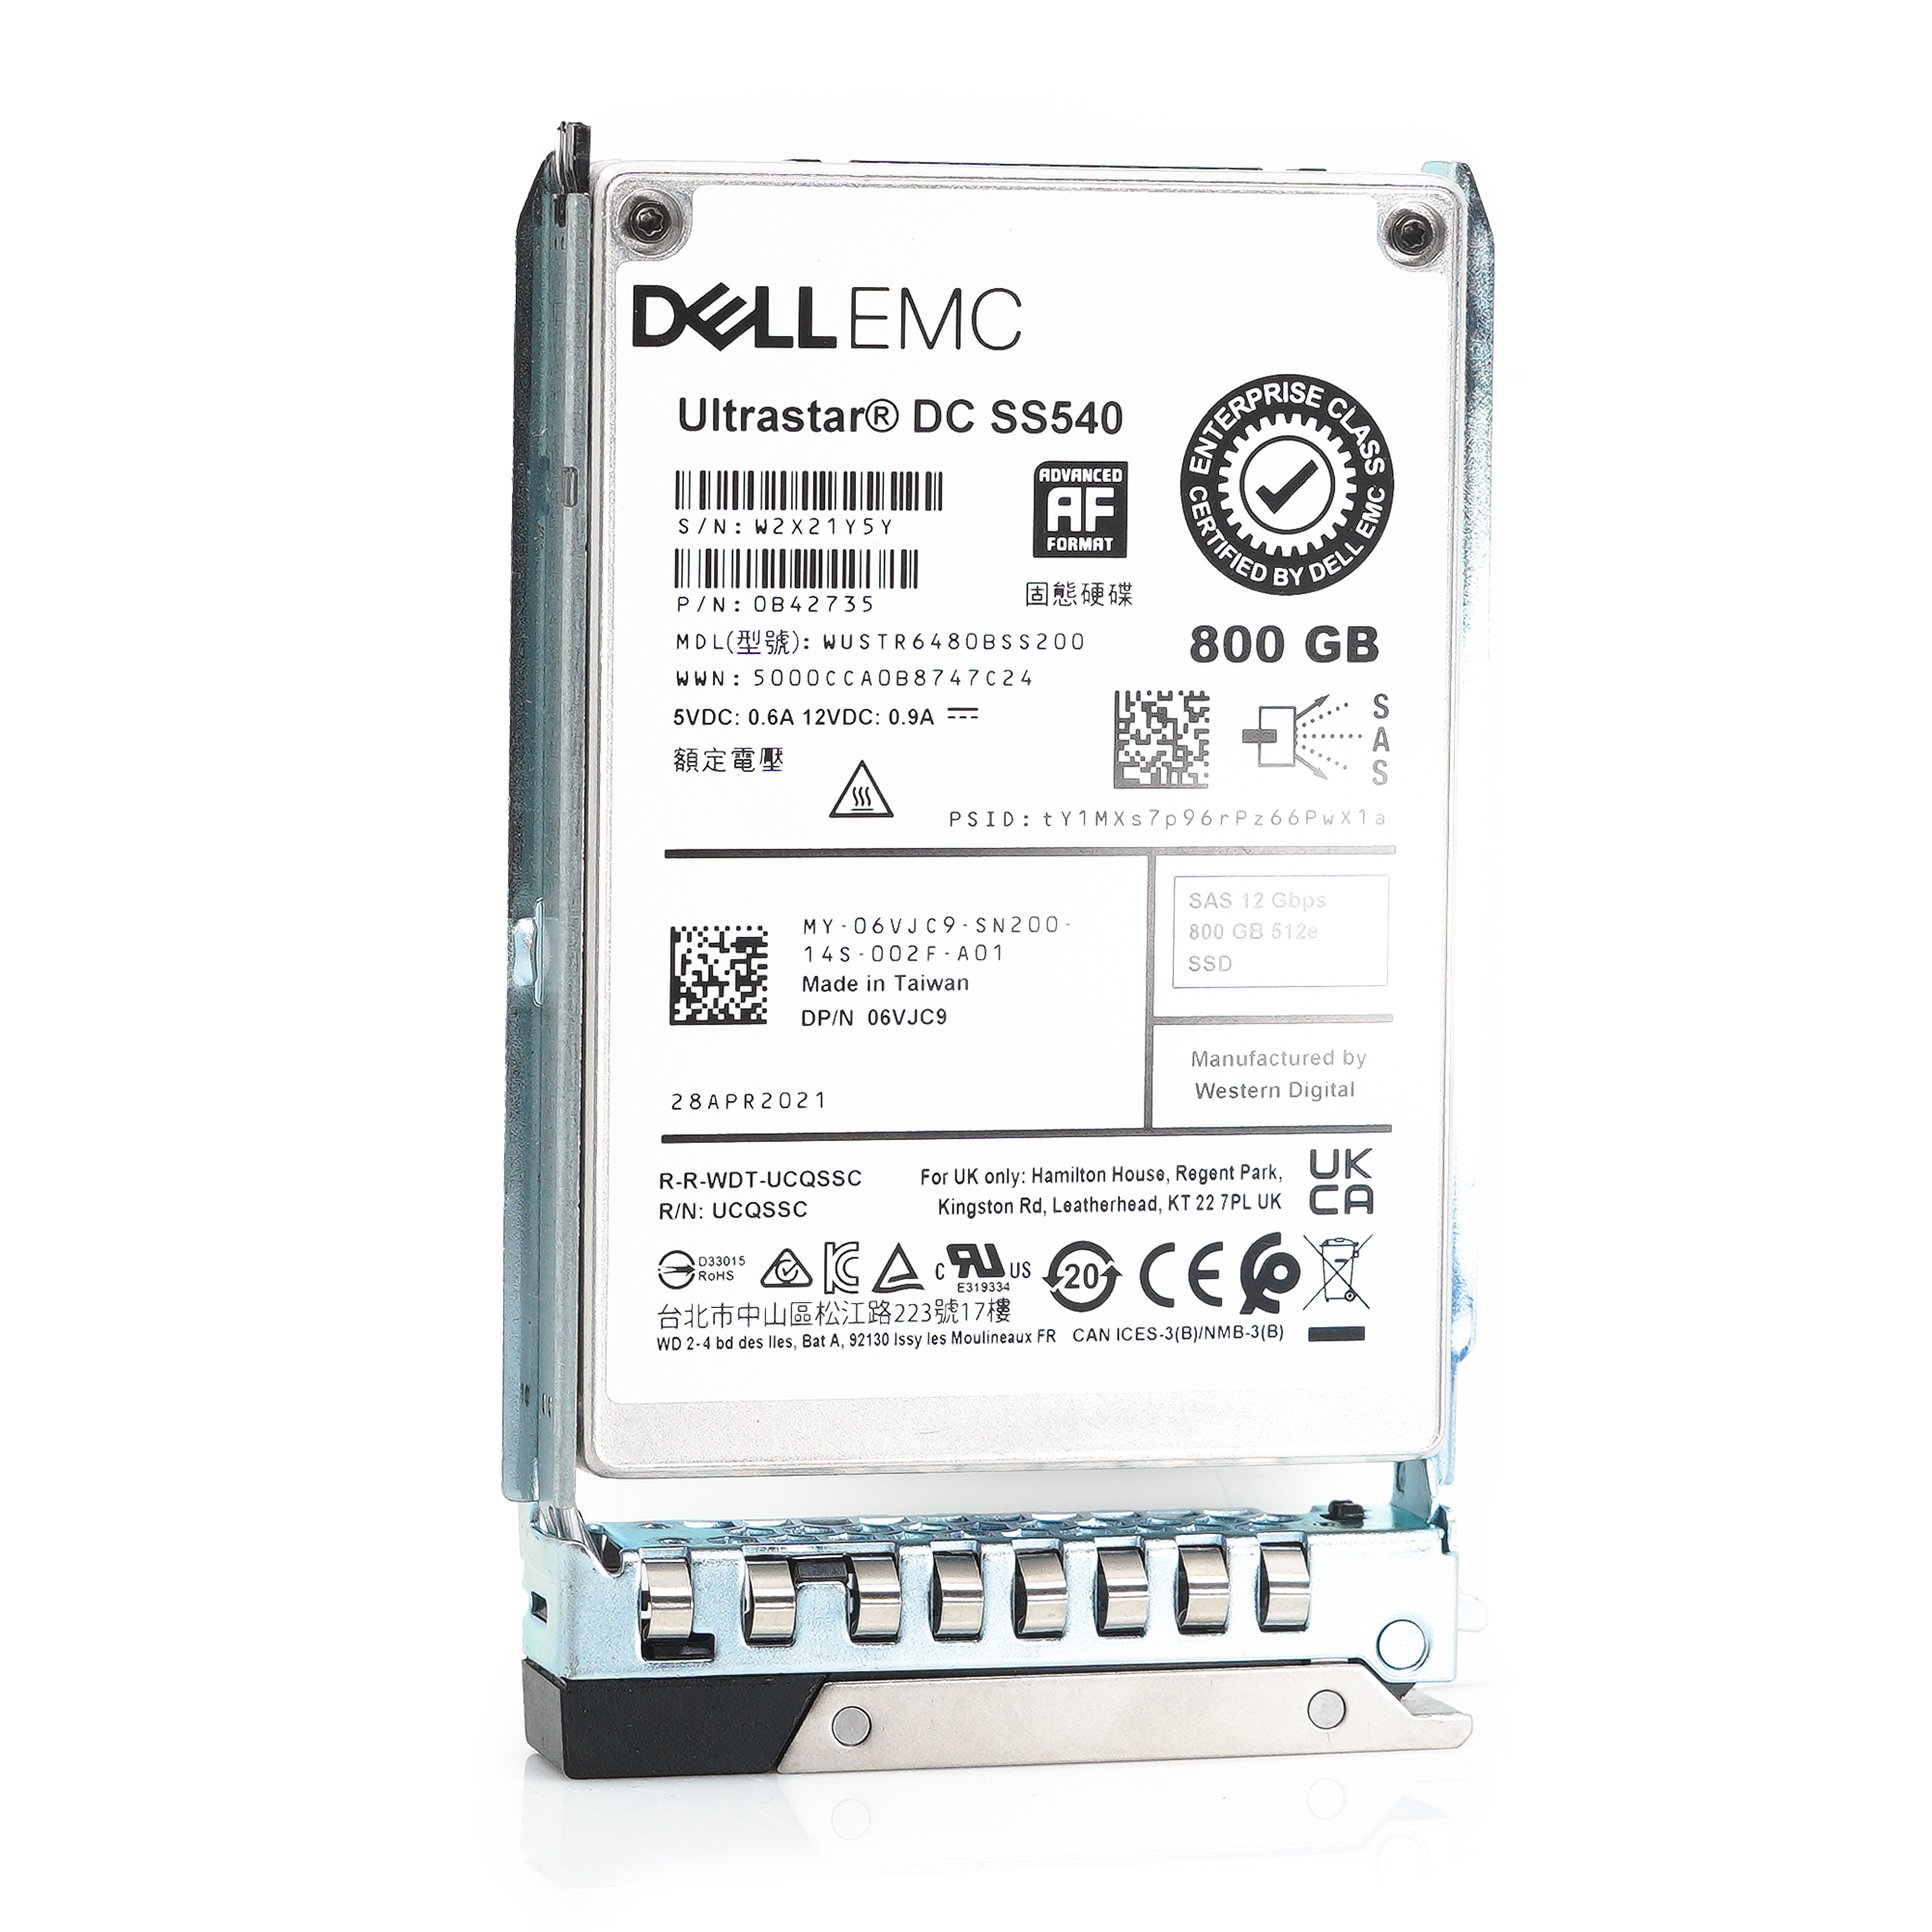 Dell G14 6VJC9 WUSTR6480BSS200 800GB SAS 12Gb/s 3DWPD Mixed Use 2.5in Refurbished SSD - Front Angle View